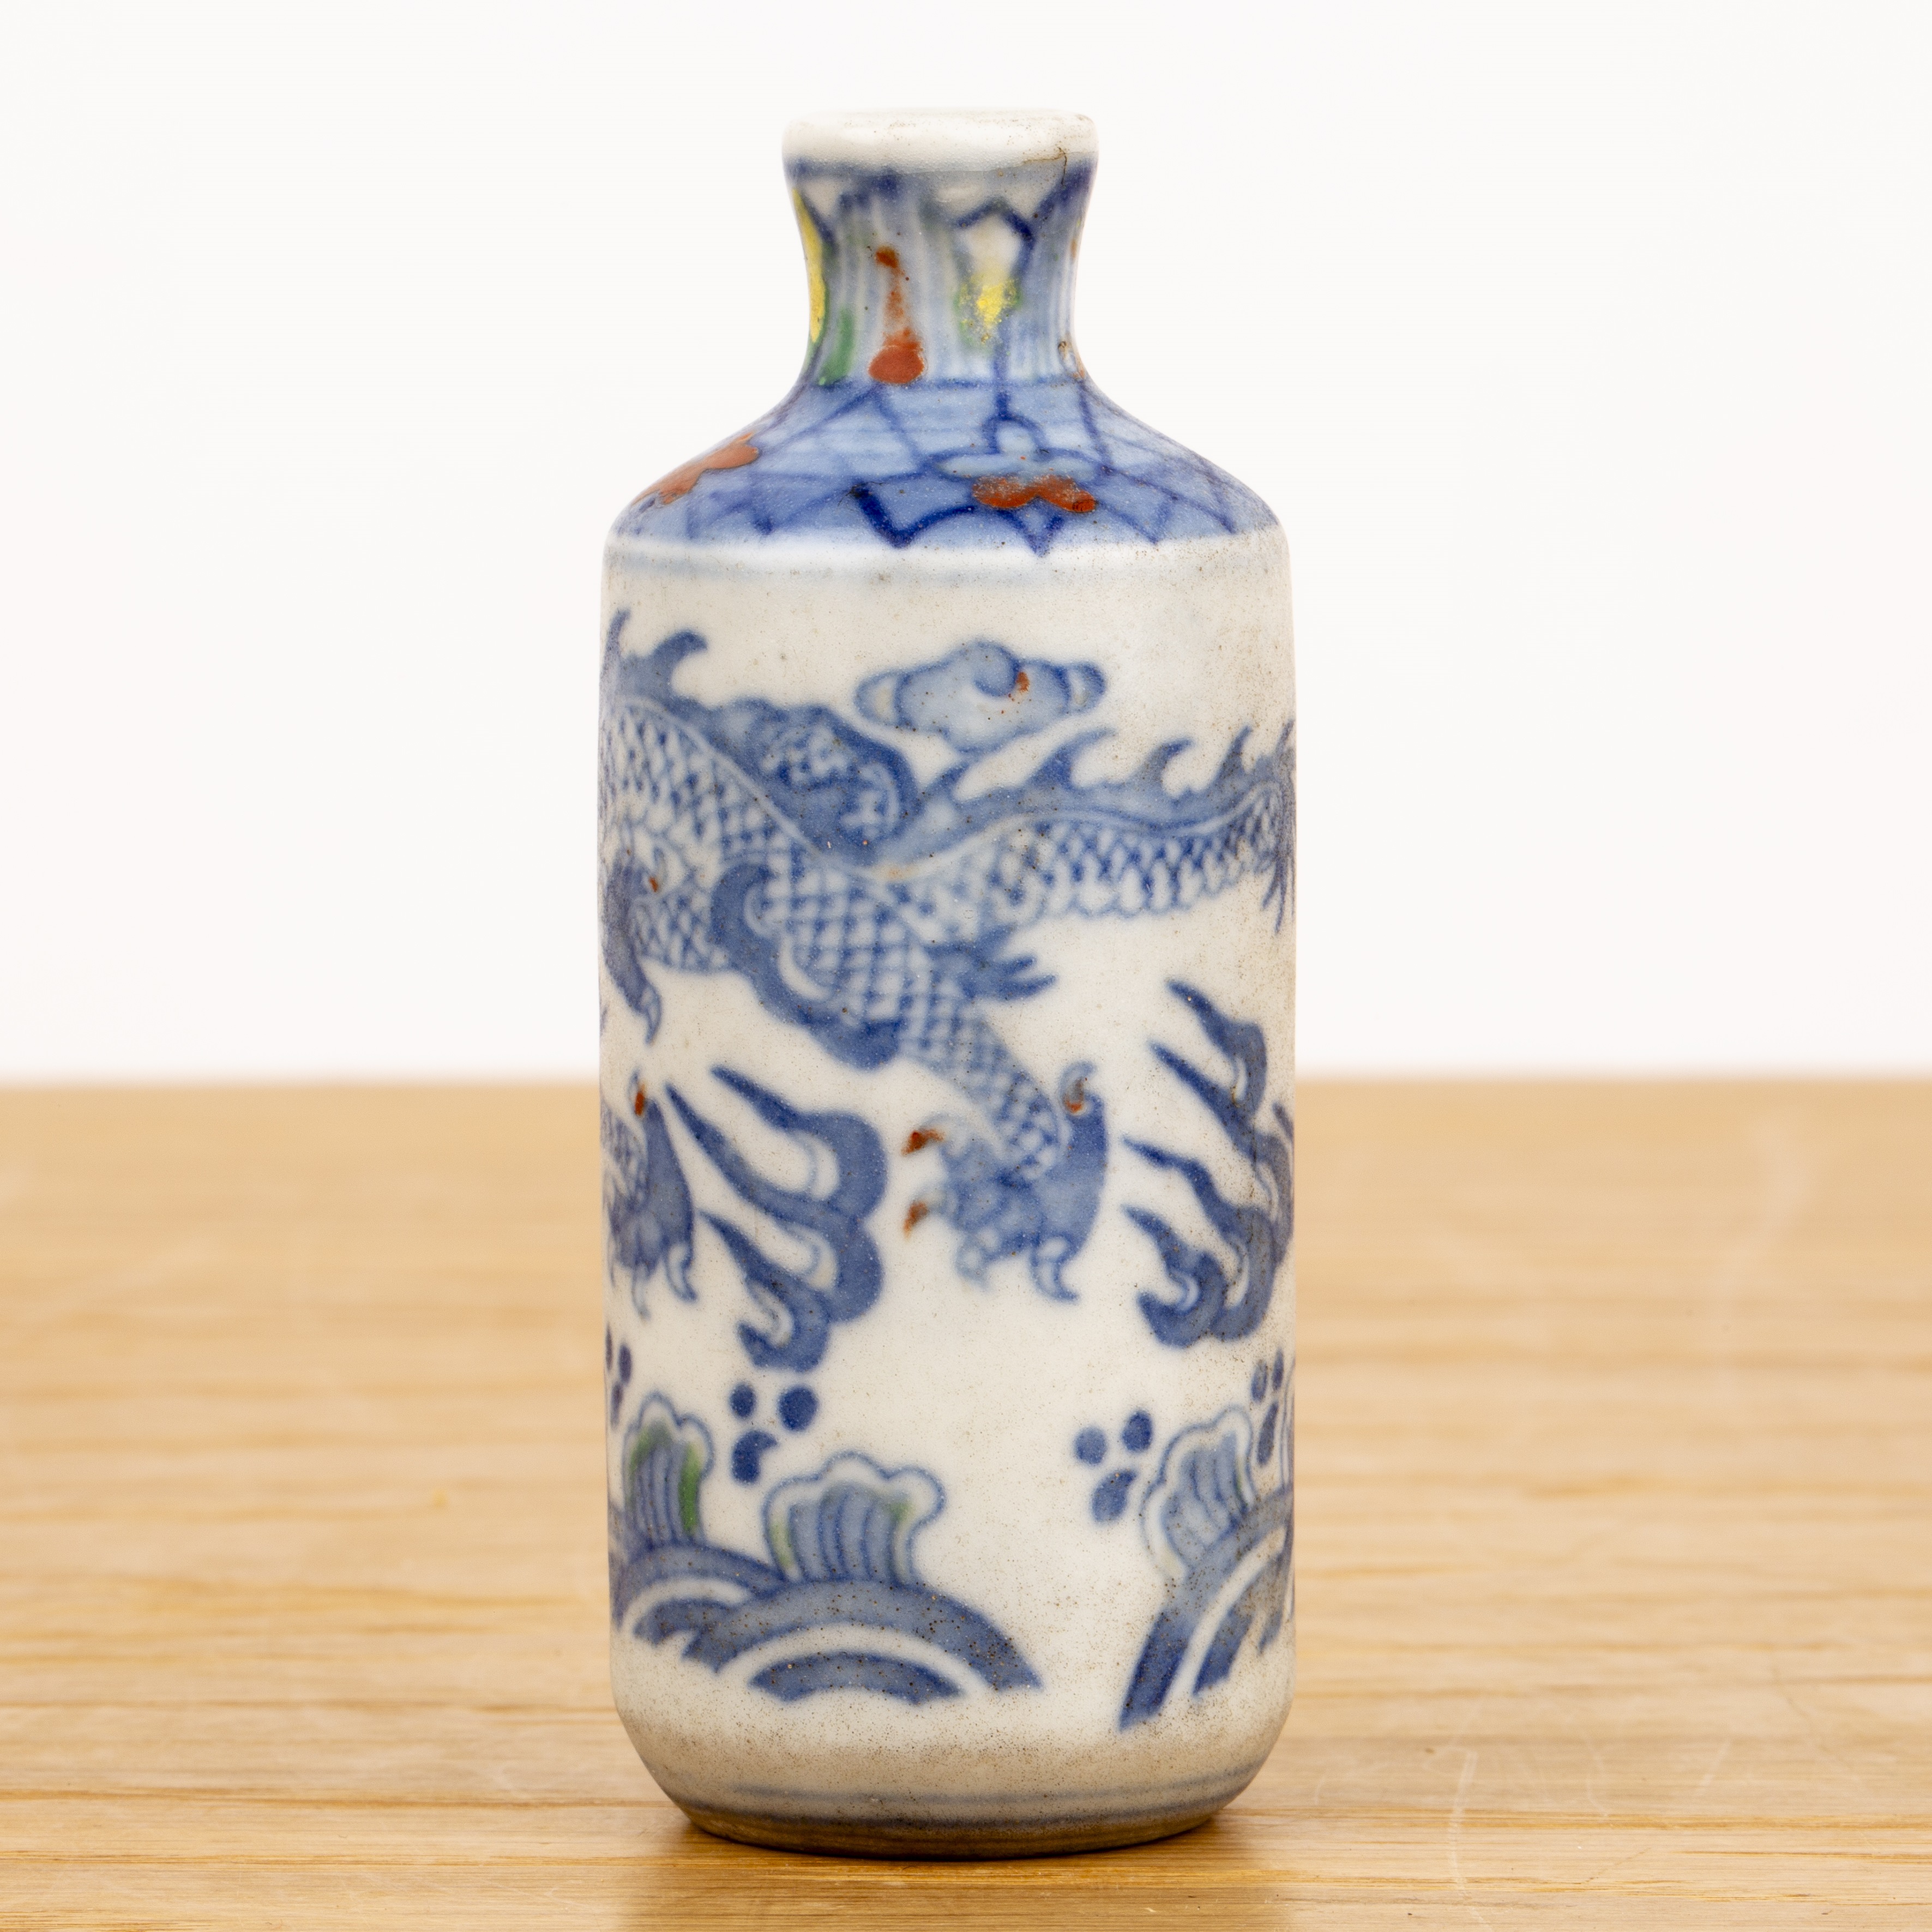 Blue and white porcelain cylindrical snuff bottle Chinese painted with a dragon and flaming - Image 2 of 3